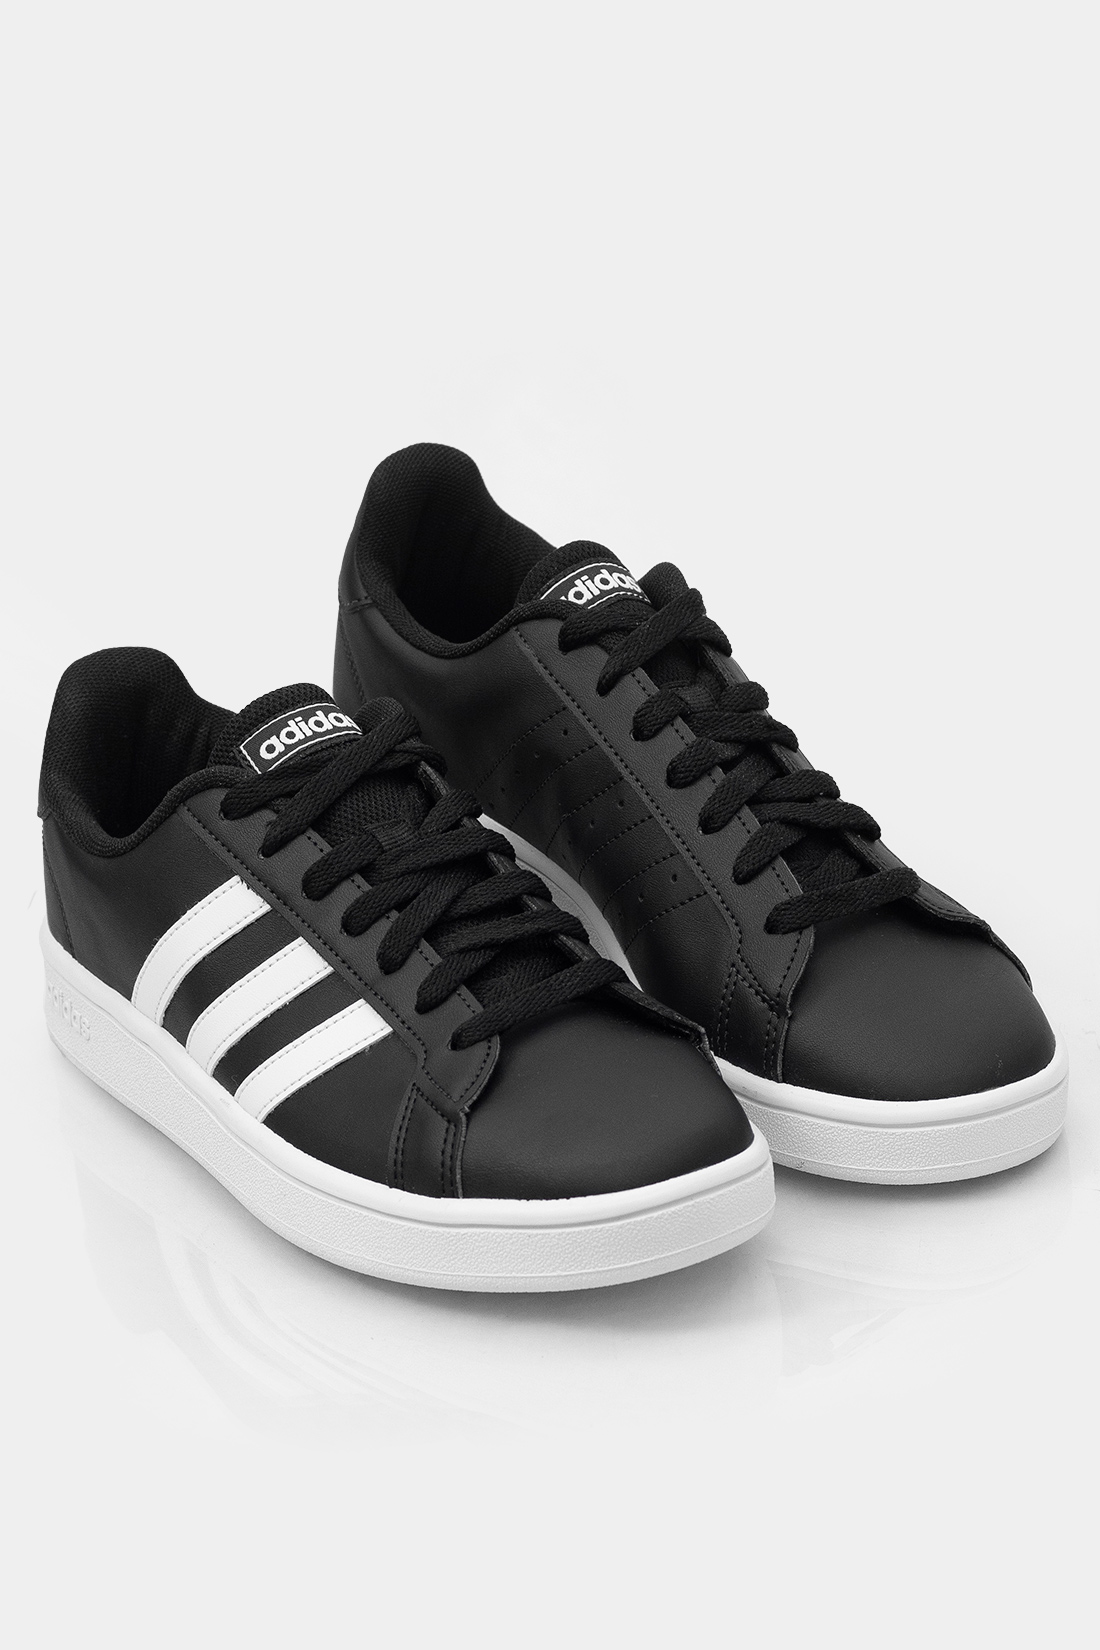 Tenis Casual Adidas Grand Court Base